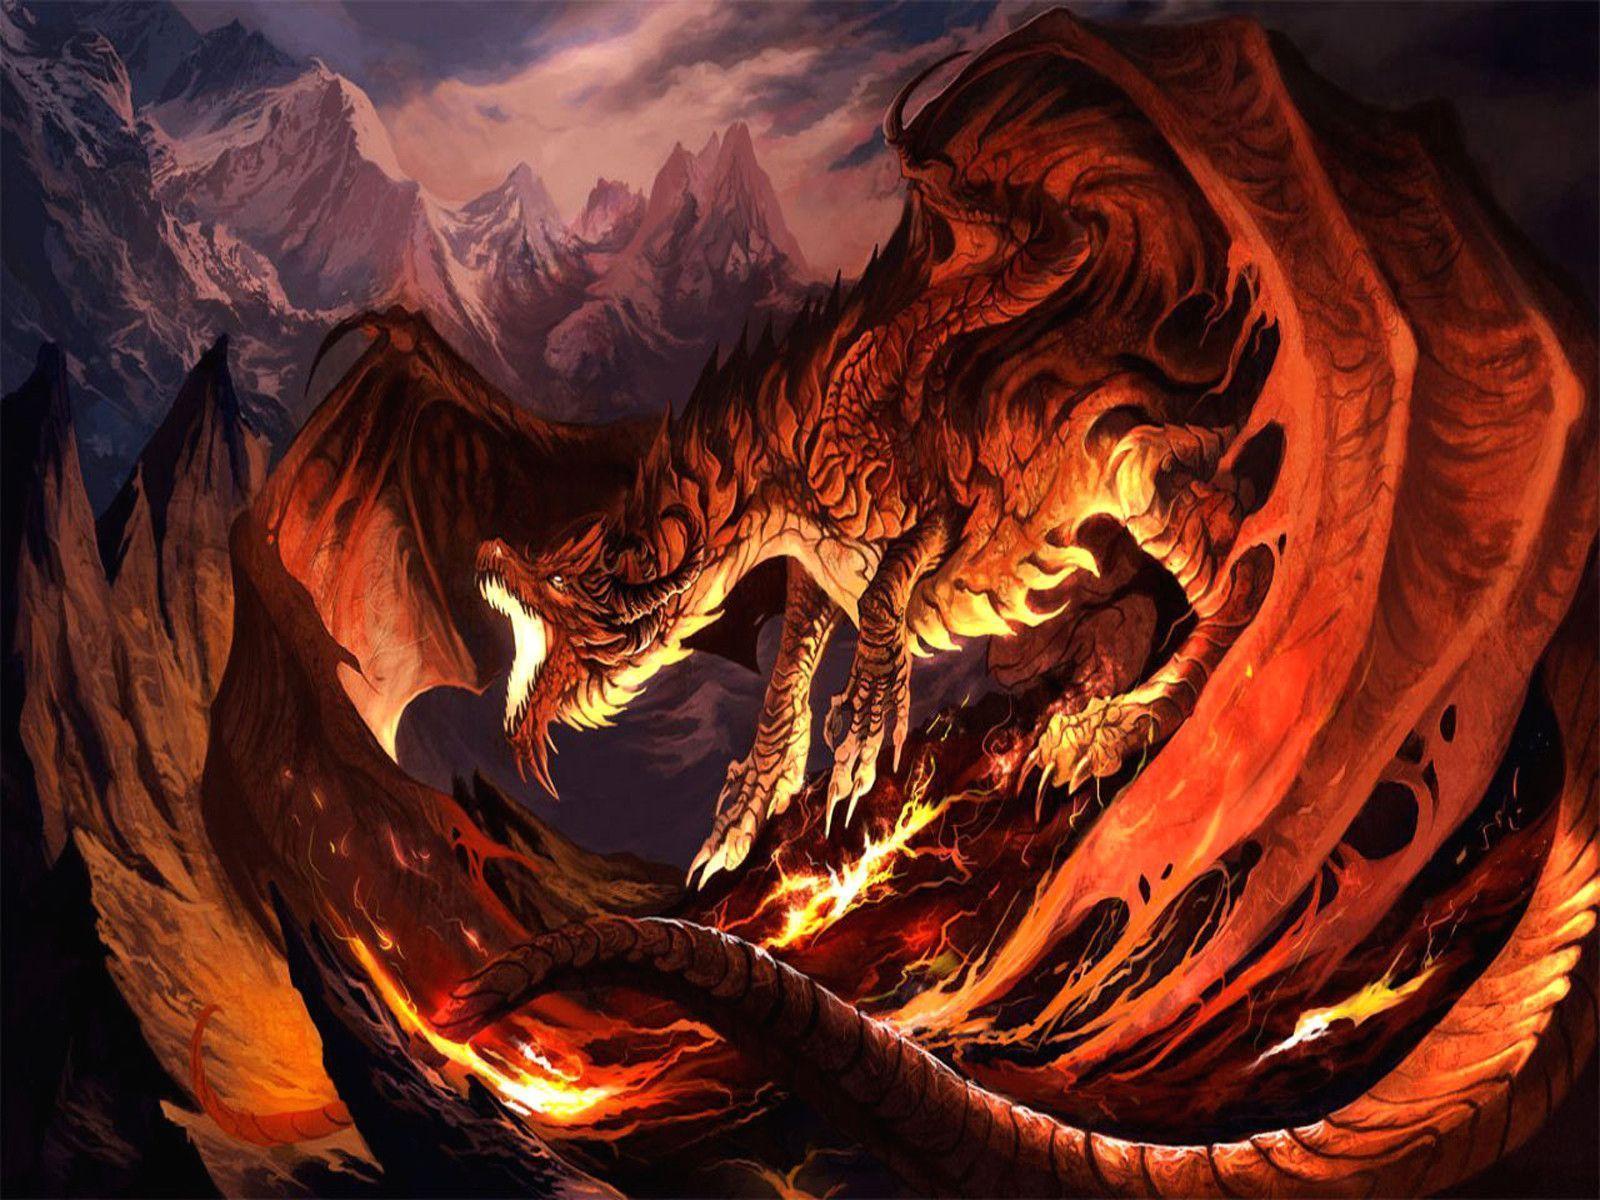 1600 x 1200 · jpeg - Awesome Dragon Wallpapers - Wallpaper Cave